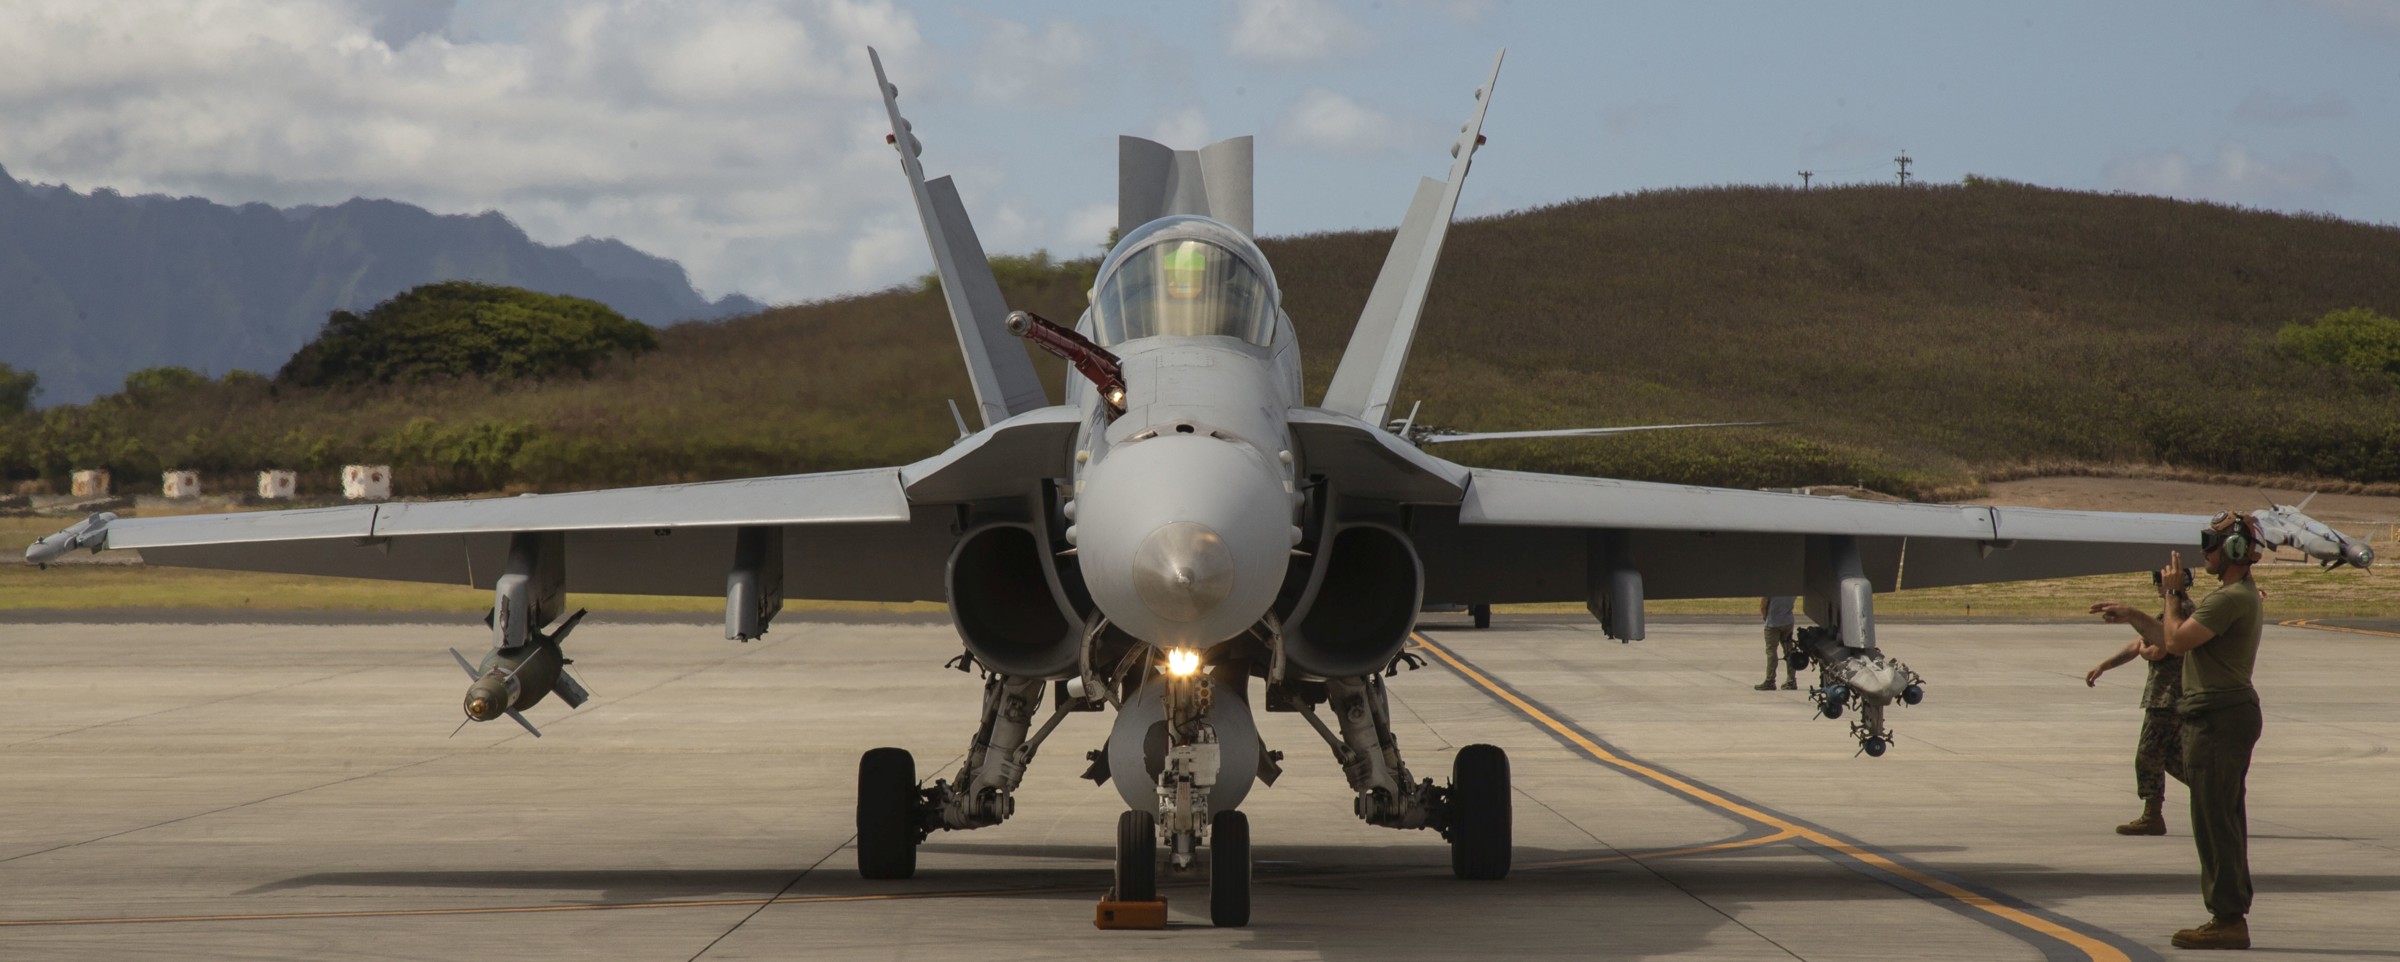 vmfa-115 silver eagles marine fighter attack squadron usmc f/a-18c hornet 201 mcb hawaii kaneohe